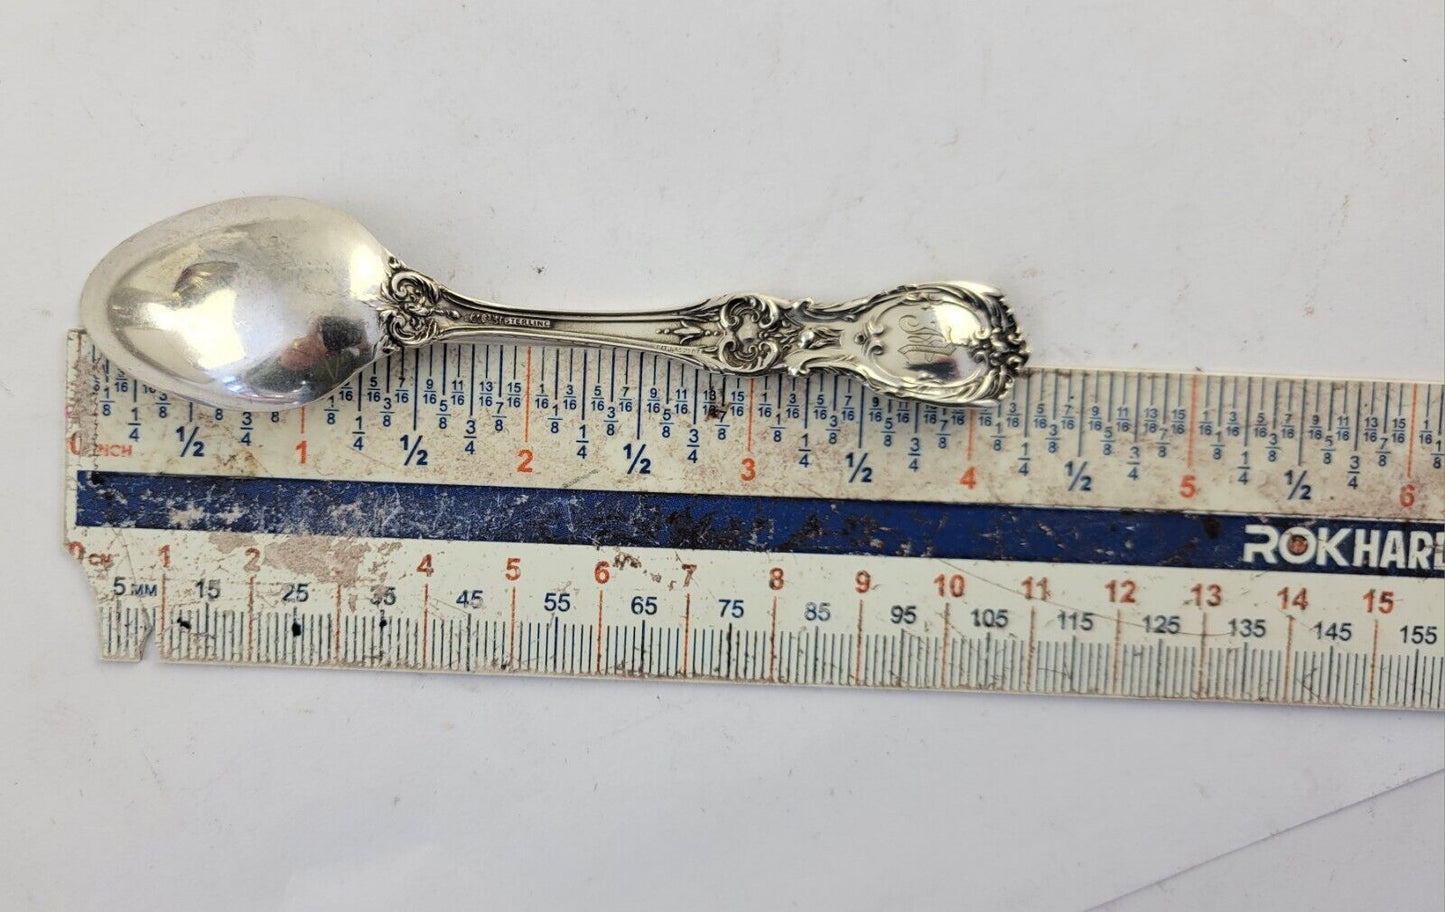 Francis I by Reed & Barton Sterling Silver 4 1/4" Demitasse Spoon .57oz.